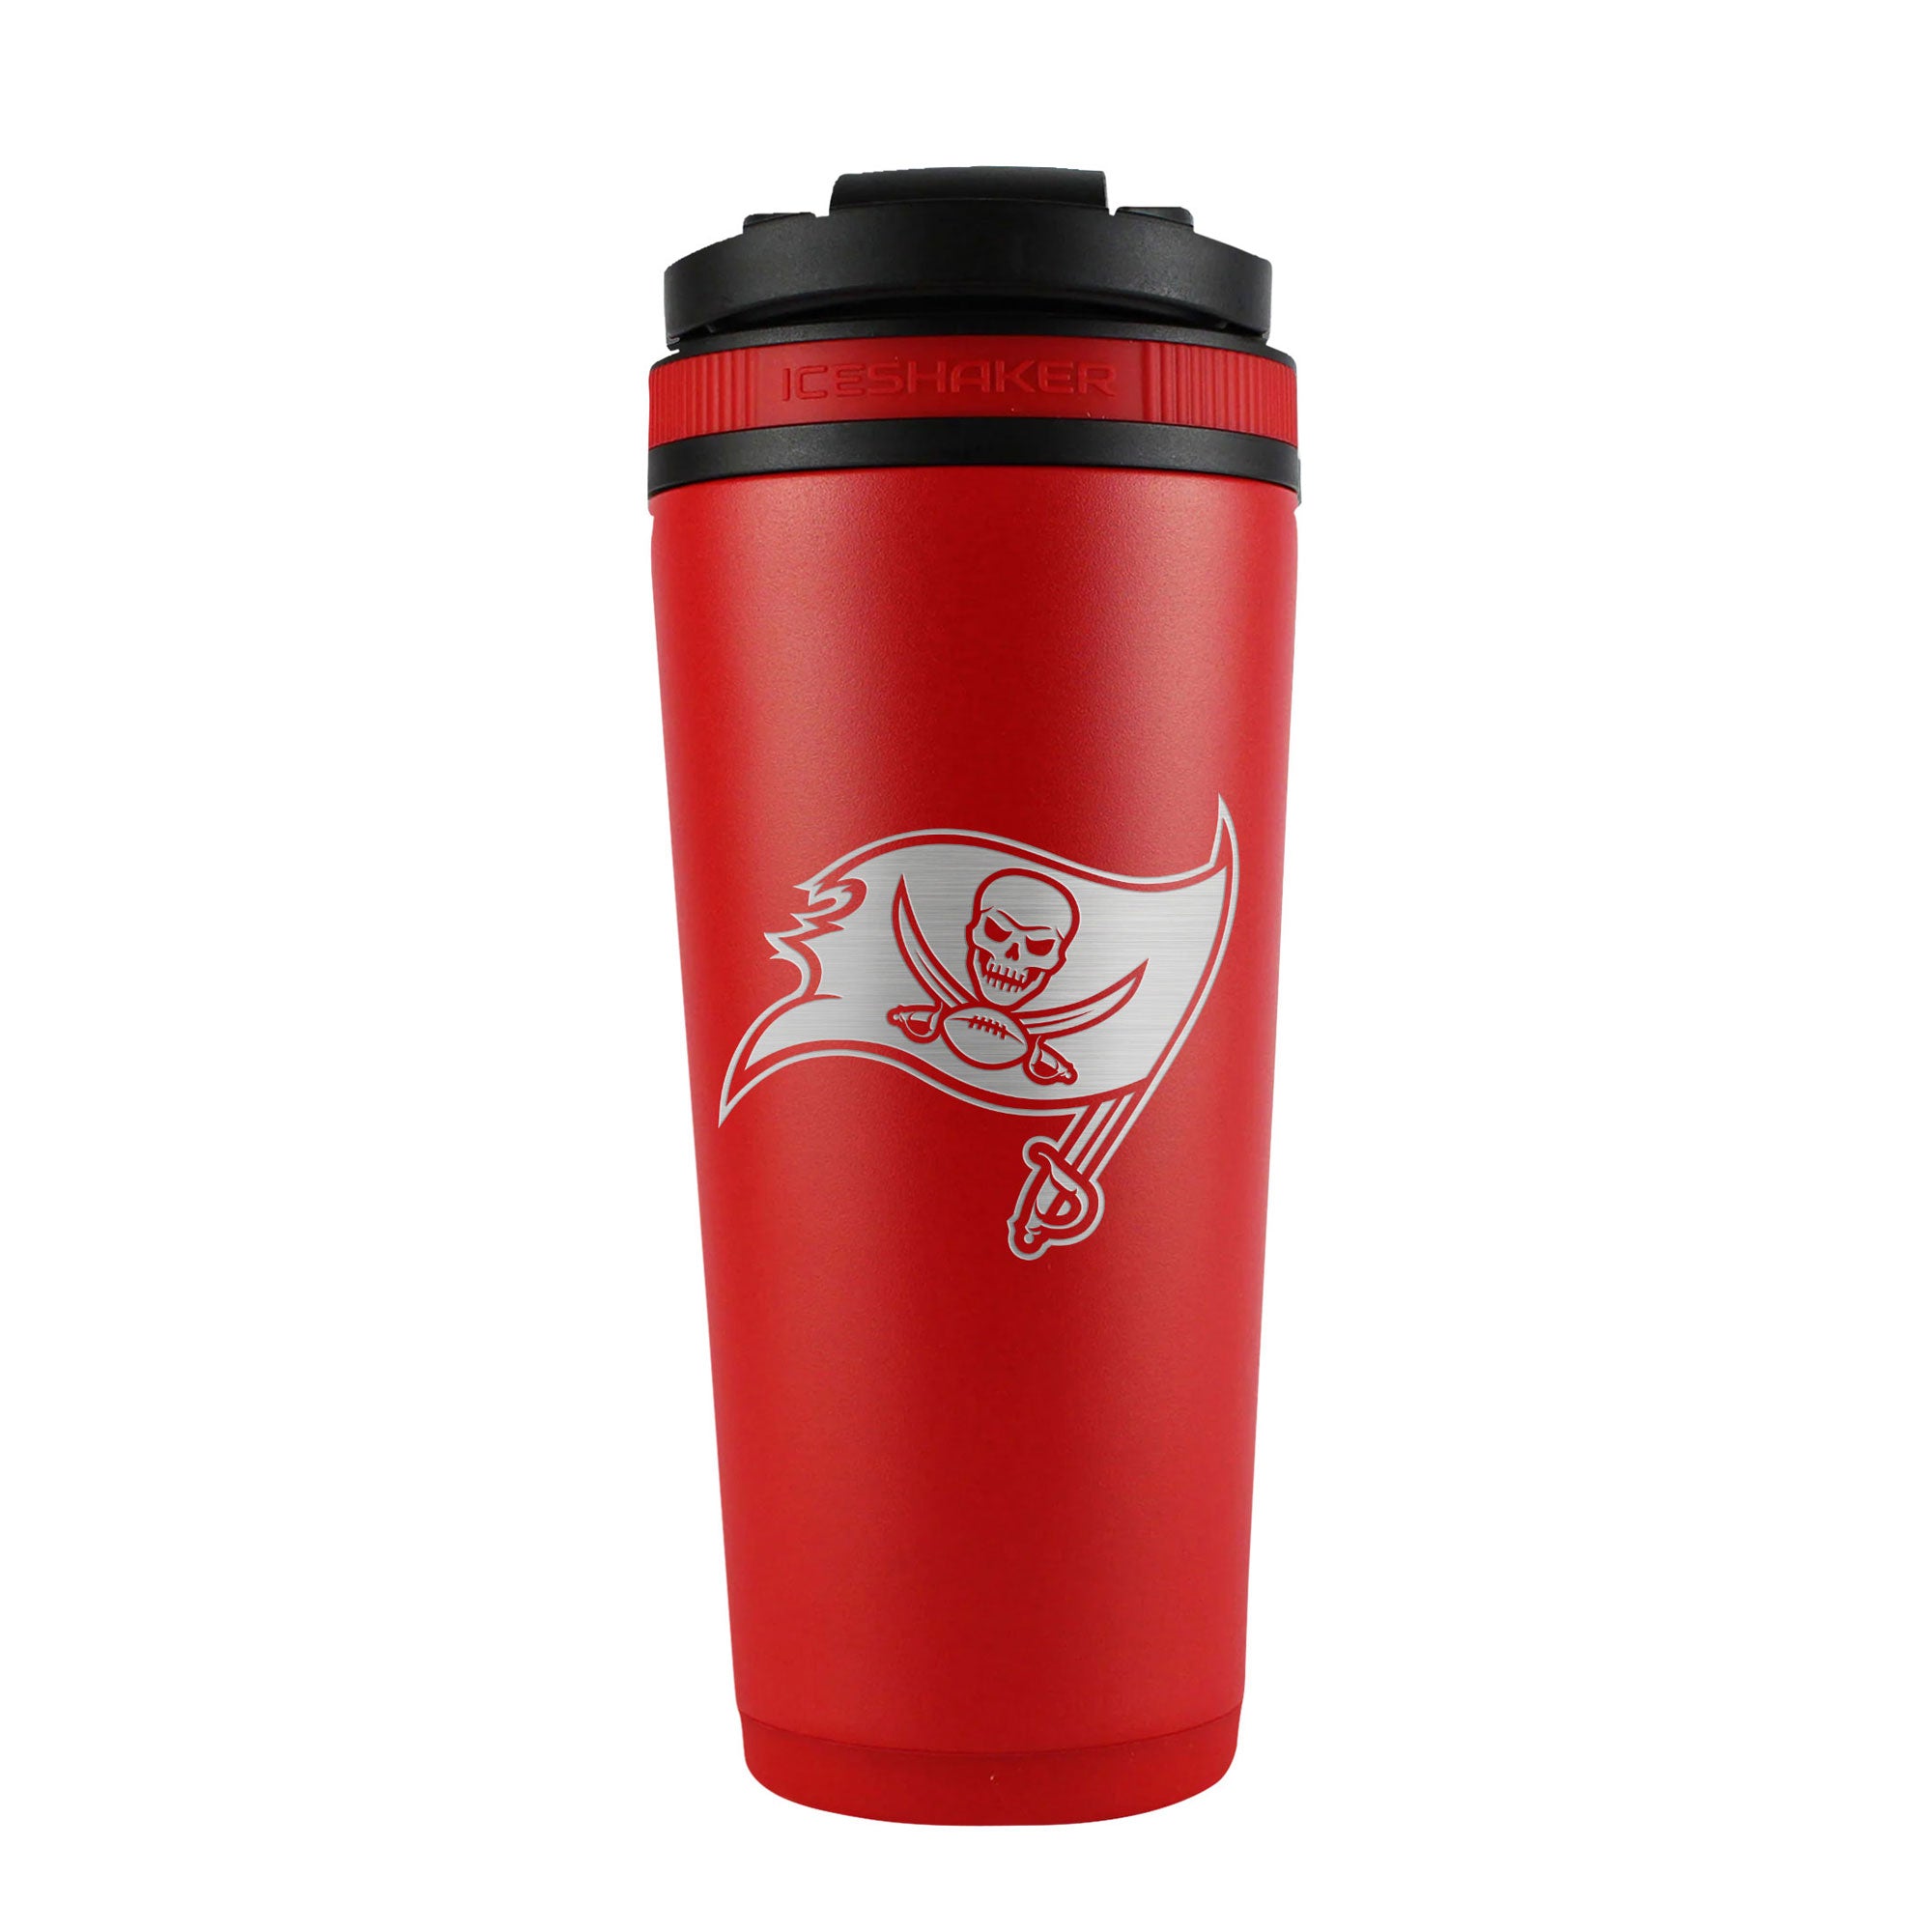 Officially Licensed Tampa Bay Buccaneers 26oz Ice Shaker - Red